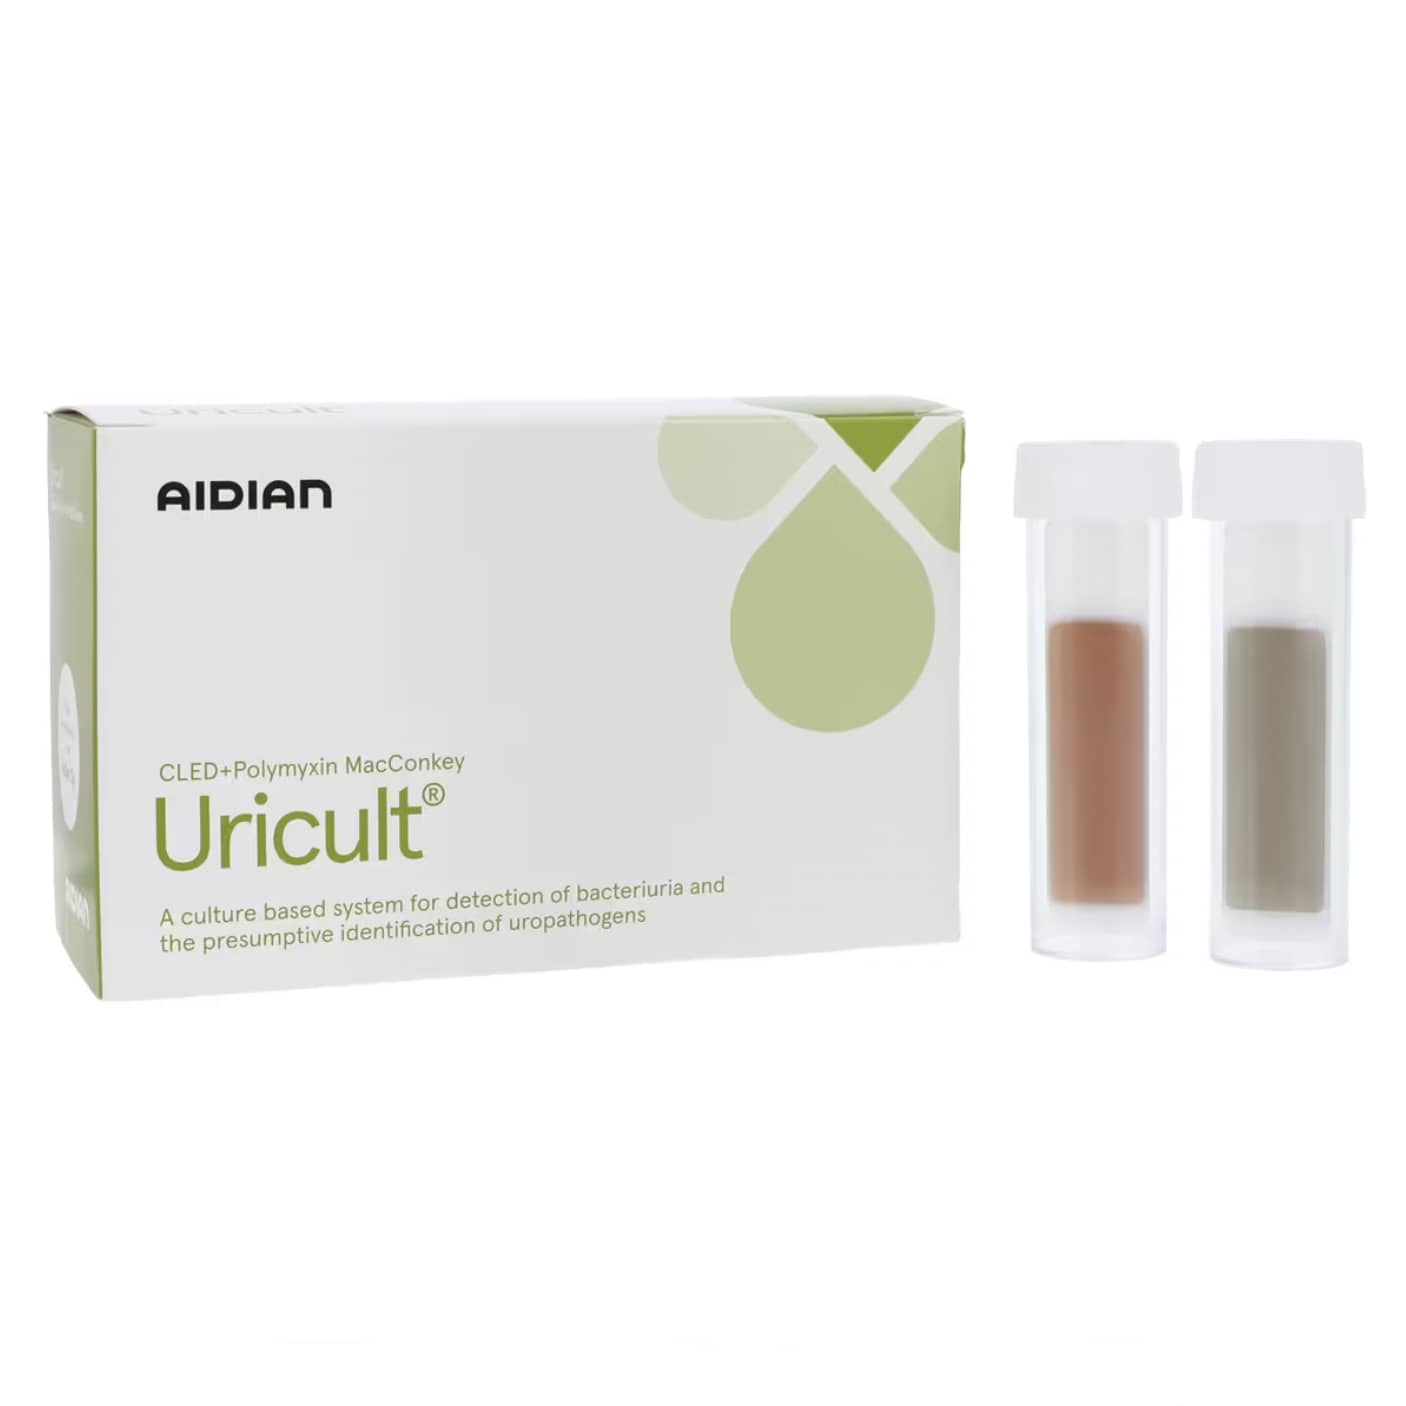 LifeSign Uricult CLED+Polymyxin/MacConkey Urine Culture System